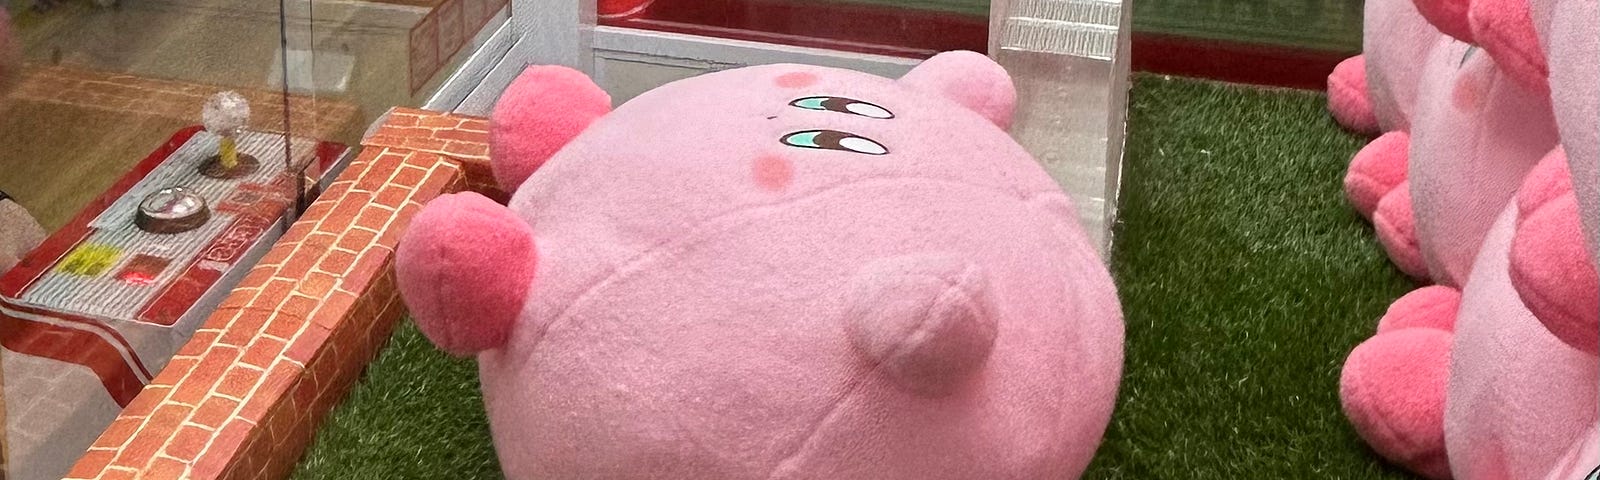 Adorable giant soft toy Kirby begging for release from a claw machine